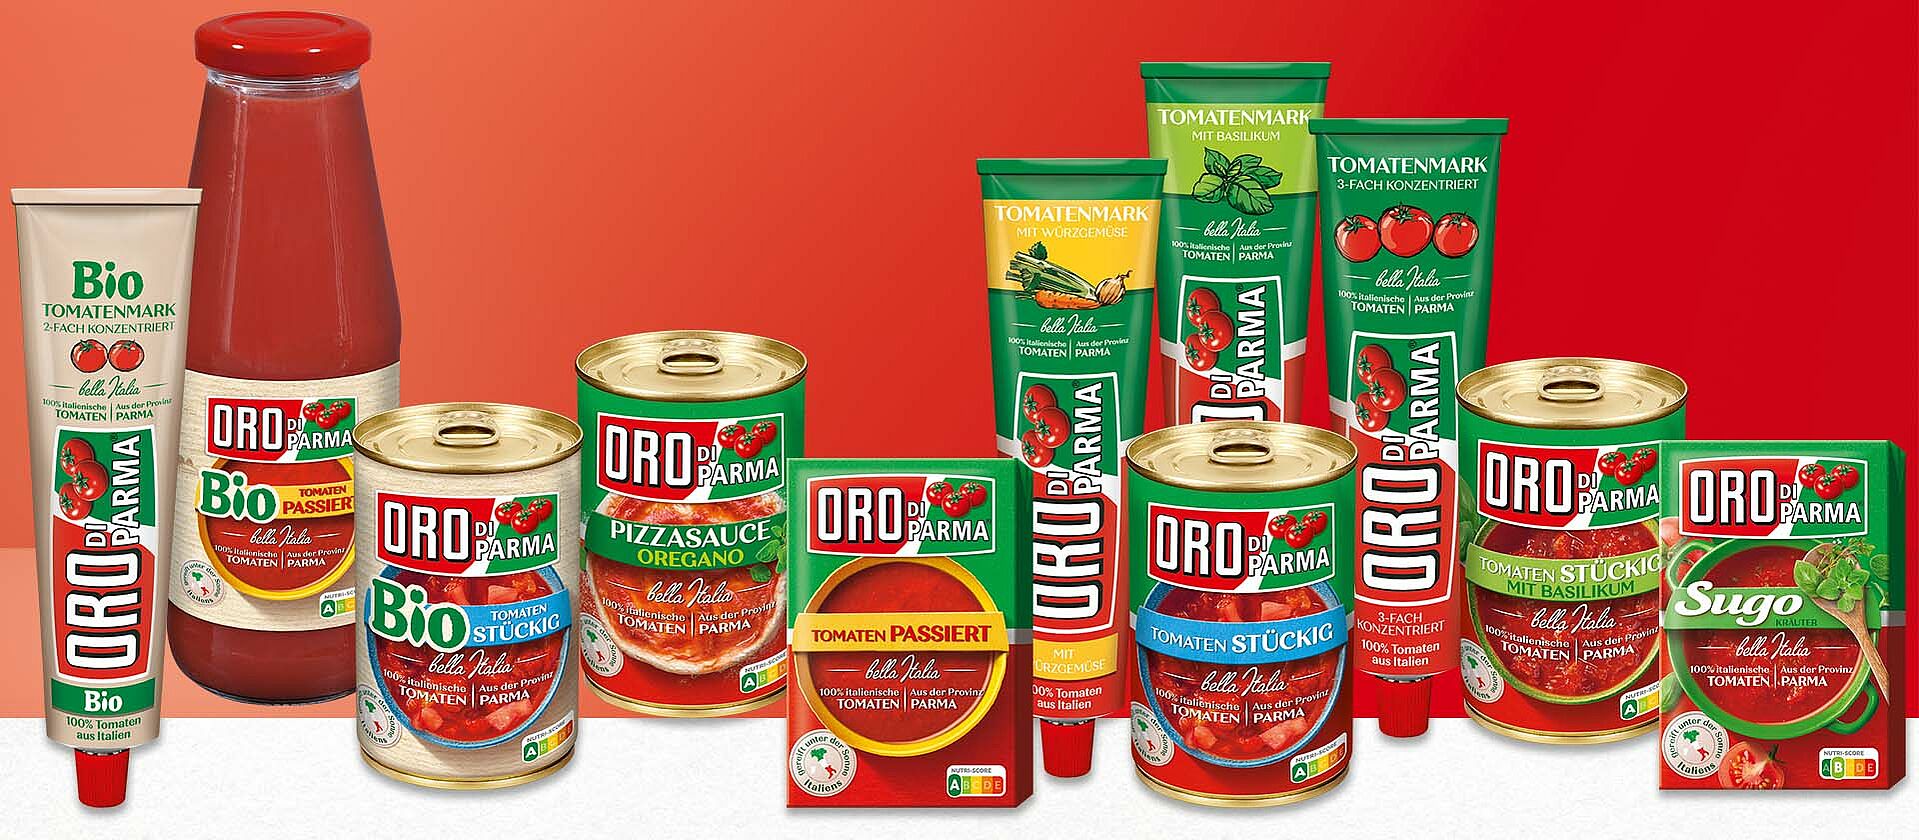 made | ORO Products di tomatoes sun-ripened Parma of